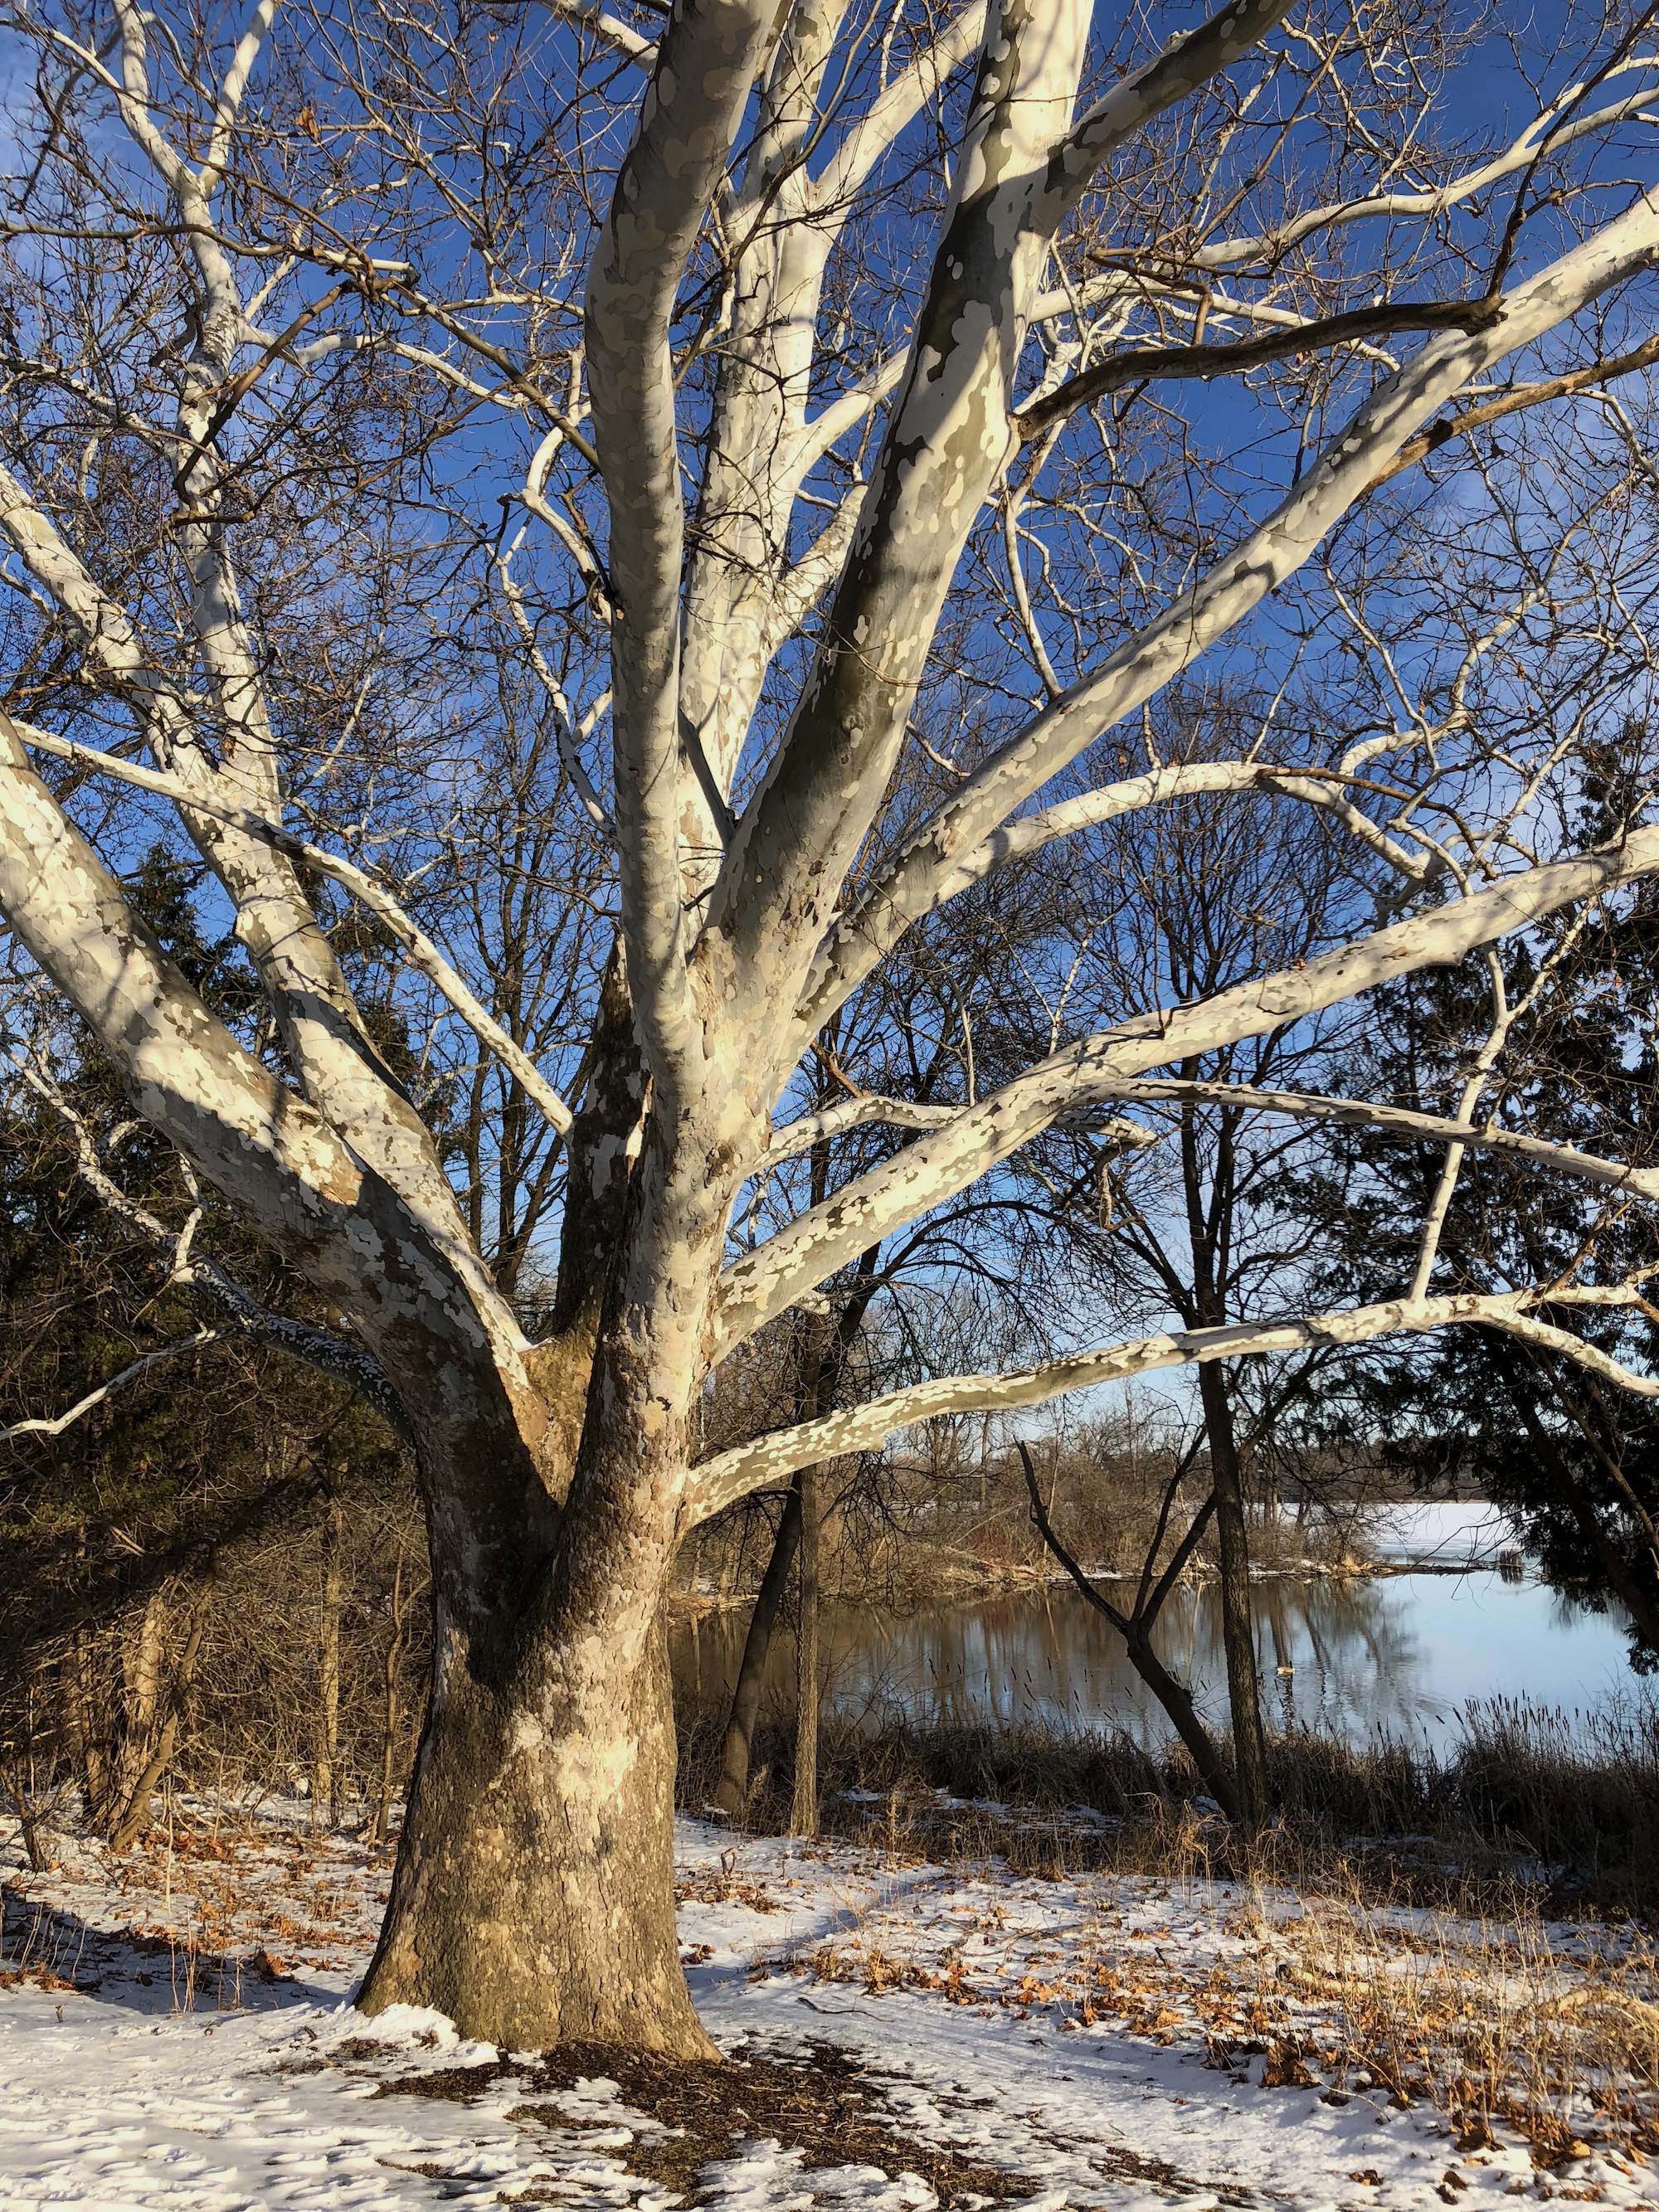 Sycamore tree between Ho-Nee-Um Pond and Arbor Drive on north shore of Lake Wingra on March 9, 2018.